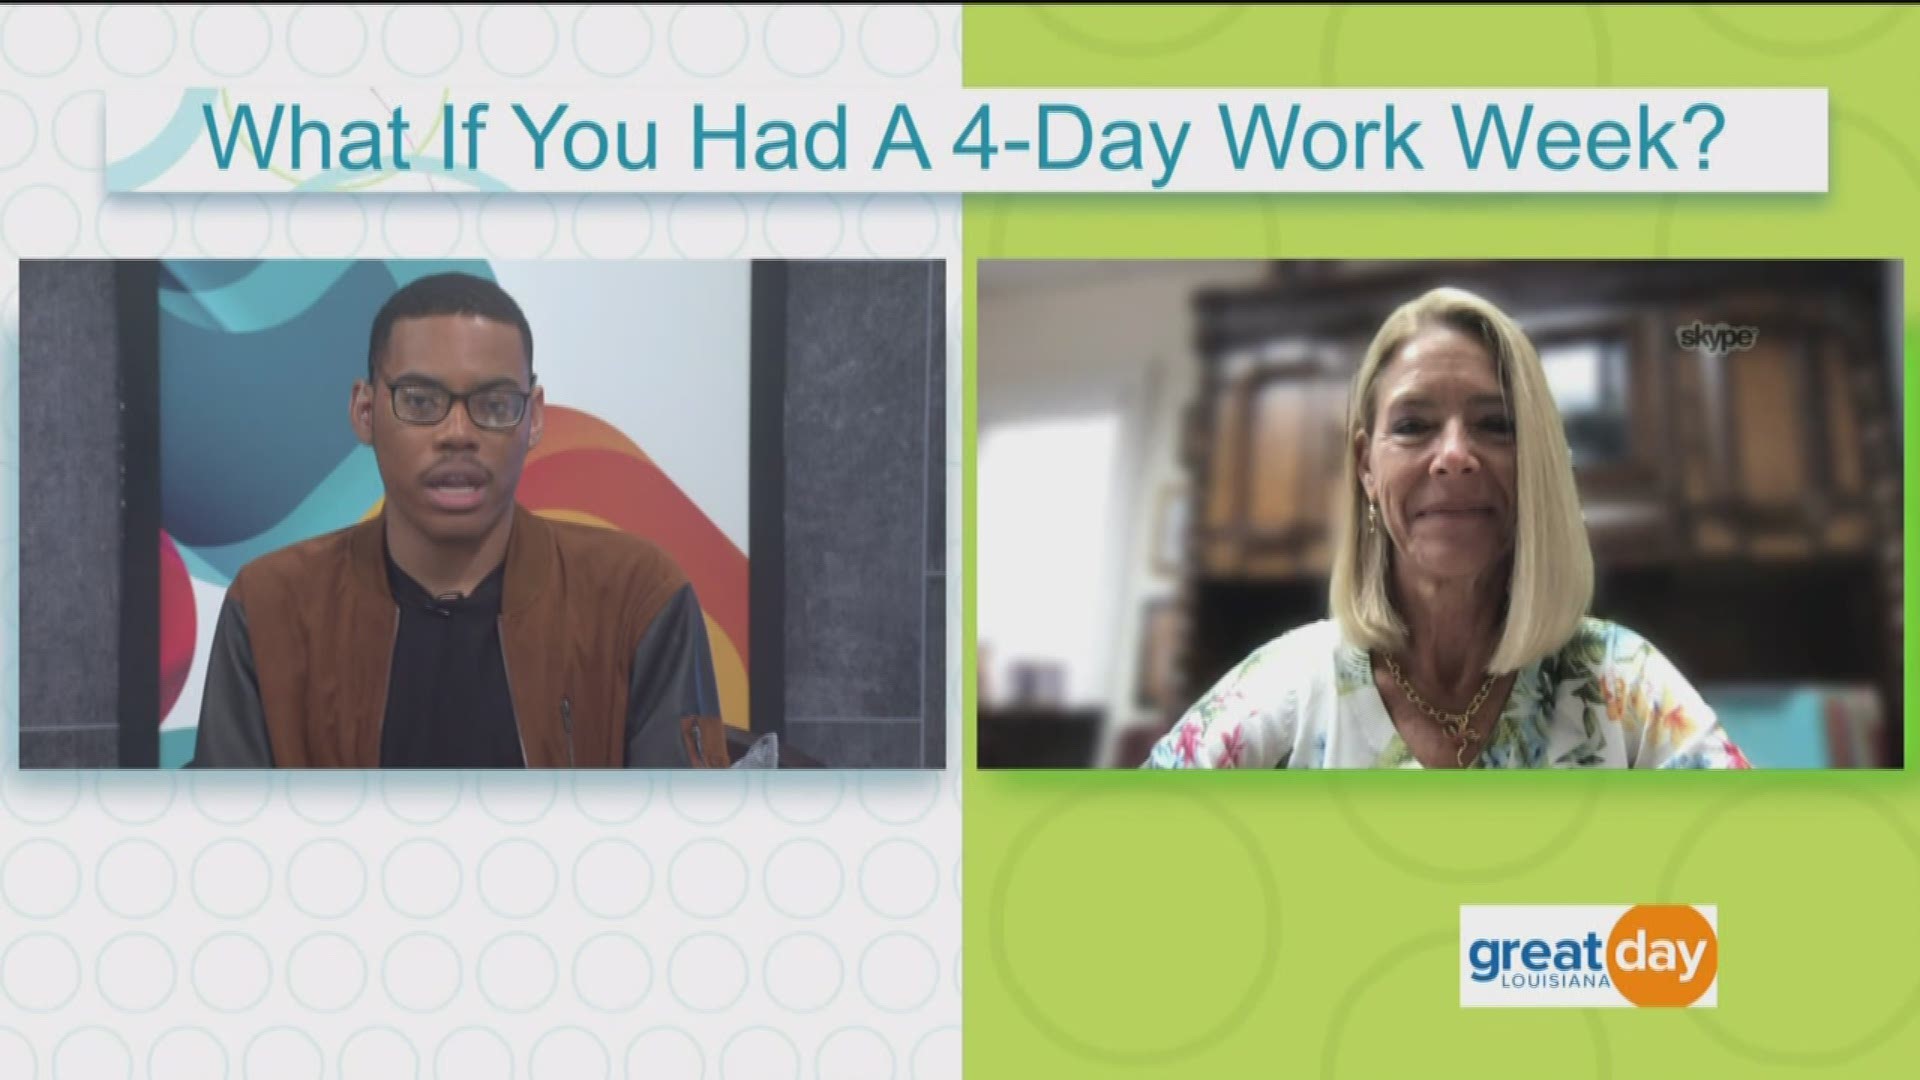 Family lawyer and legal strategist, Joryn Jenkins, discussed the topic of 4-day work weeks.